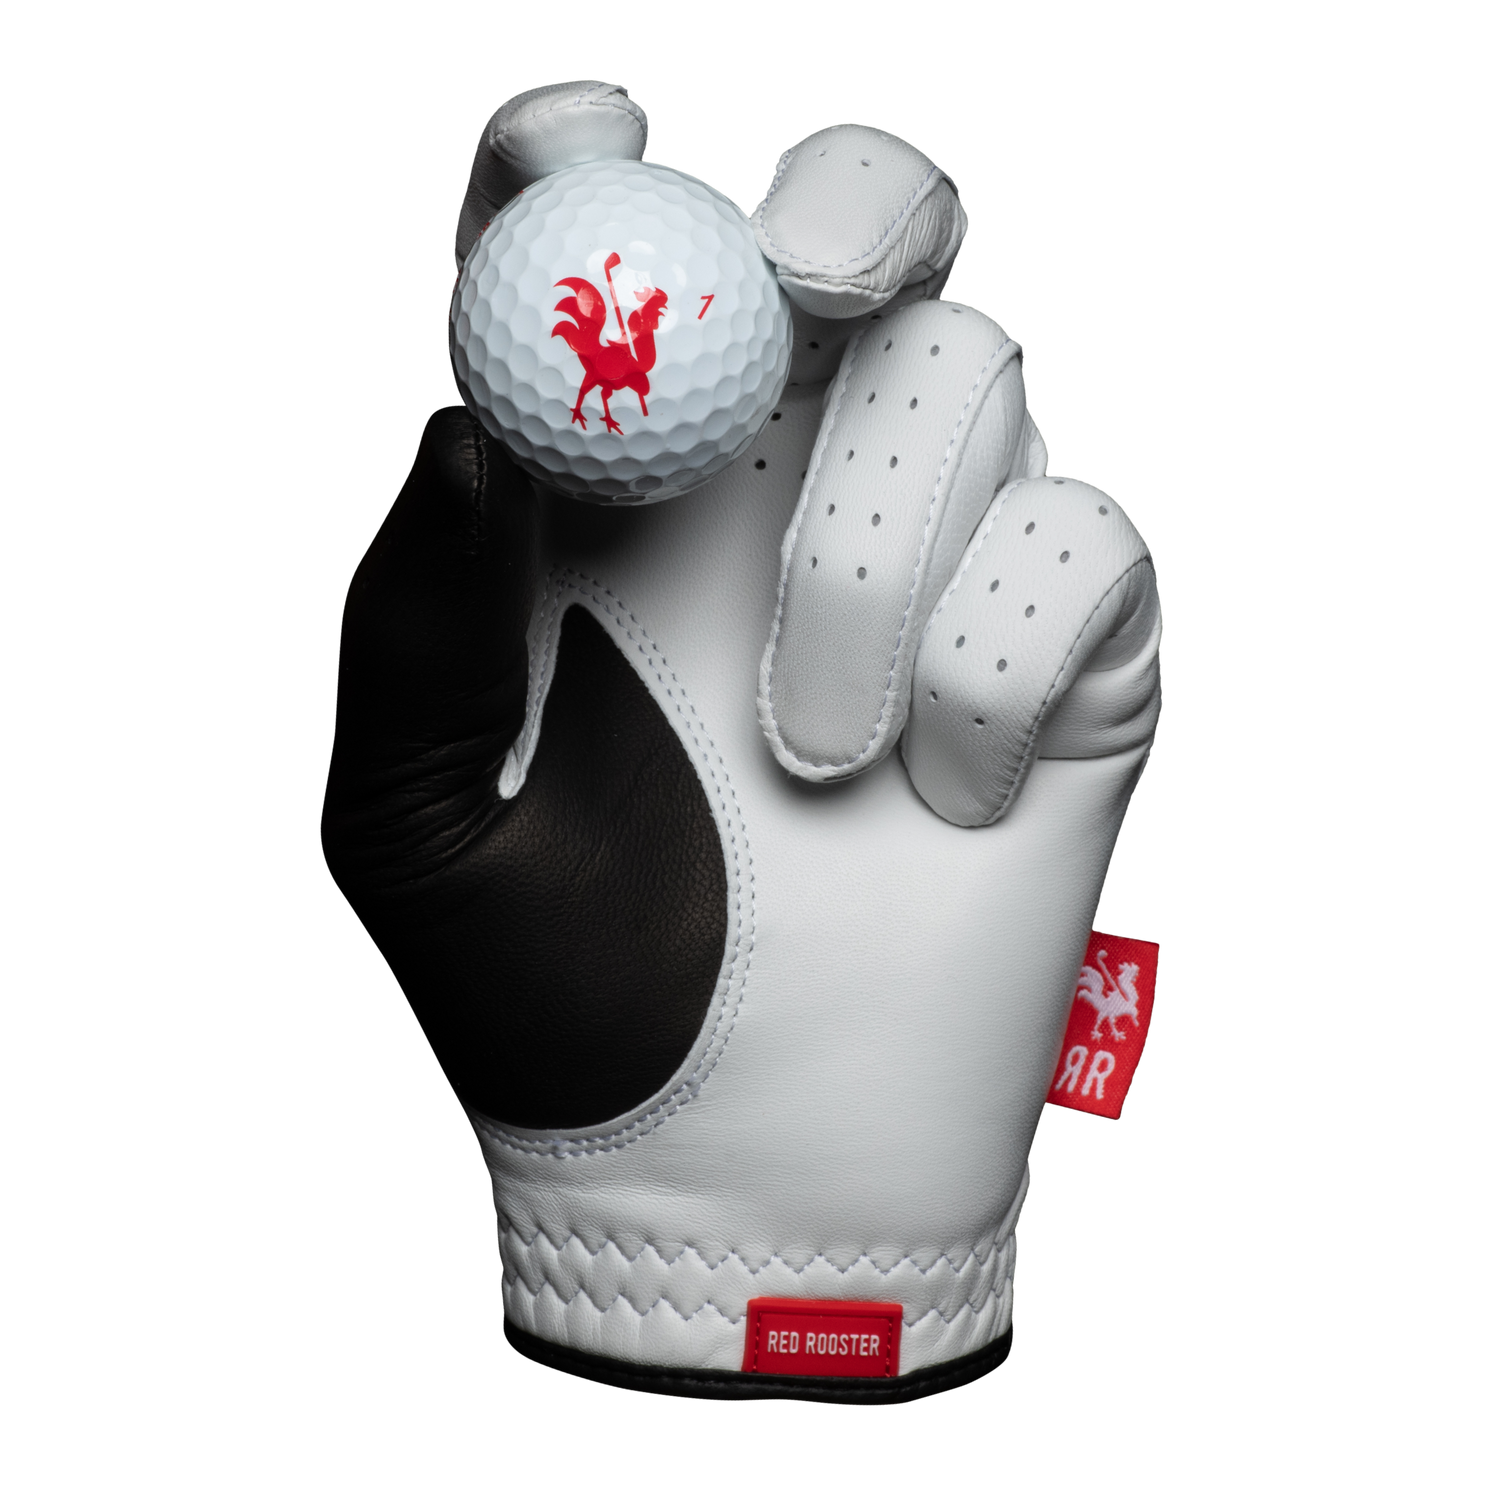 The Wing golf glove holding golf ball